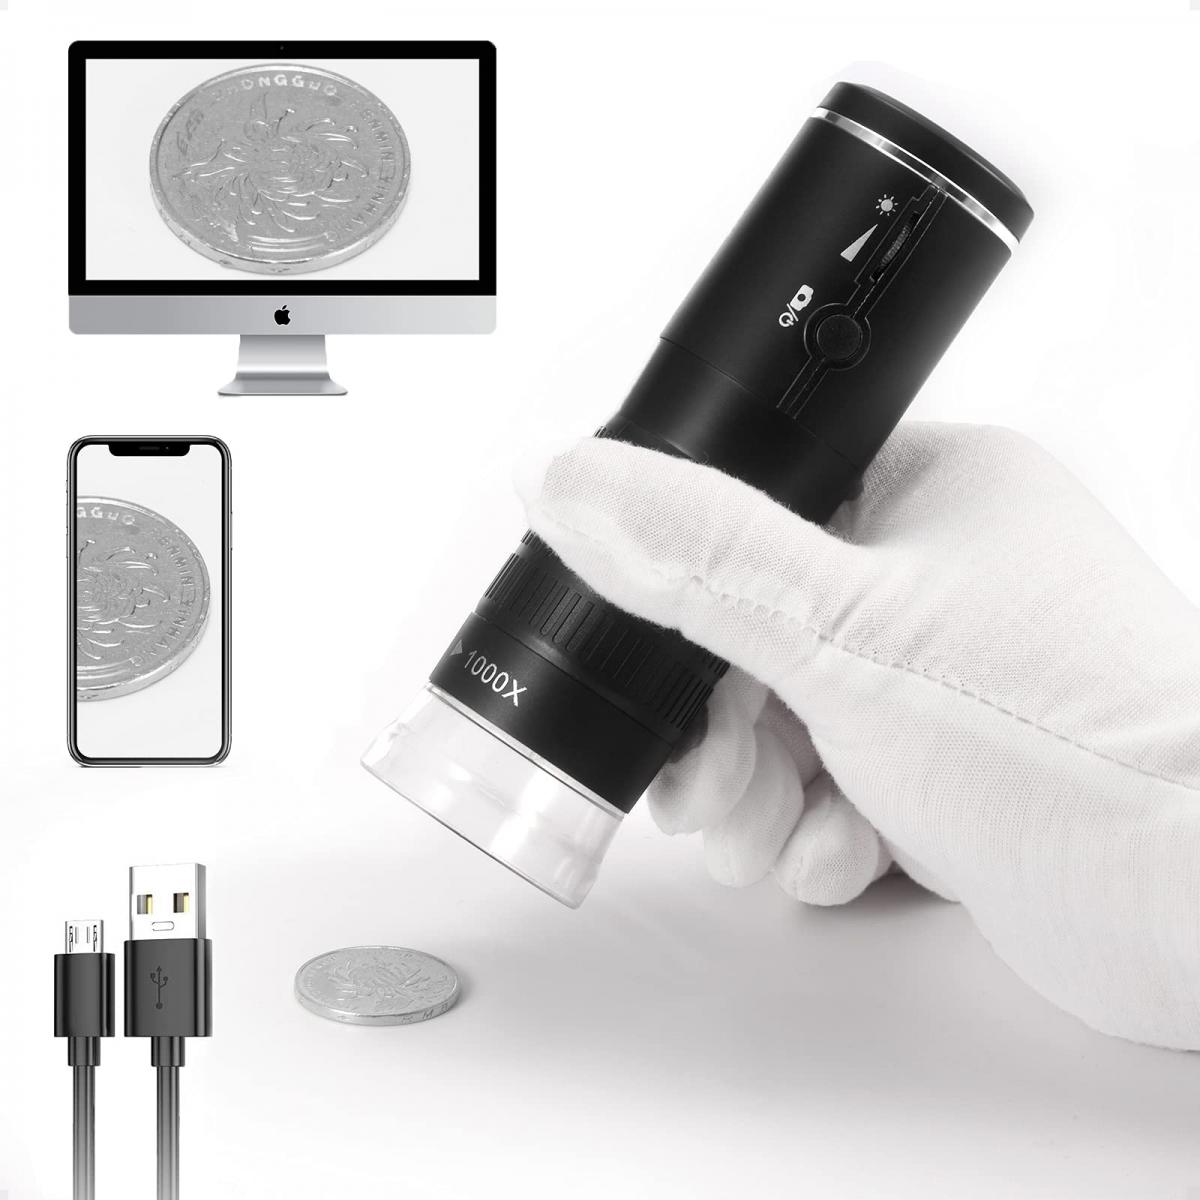 Limited Price Reduction Intee Wireless Digital Microscope,50X To 1000X WiFi Microscope Flexible Arm Observation Stand with 1080P HD 2.0 MP 8 LED Mini Handheld Microscope Camera for Android IOS PC 